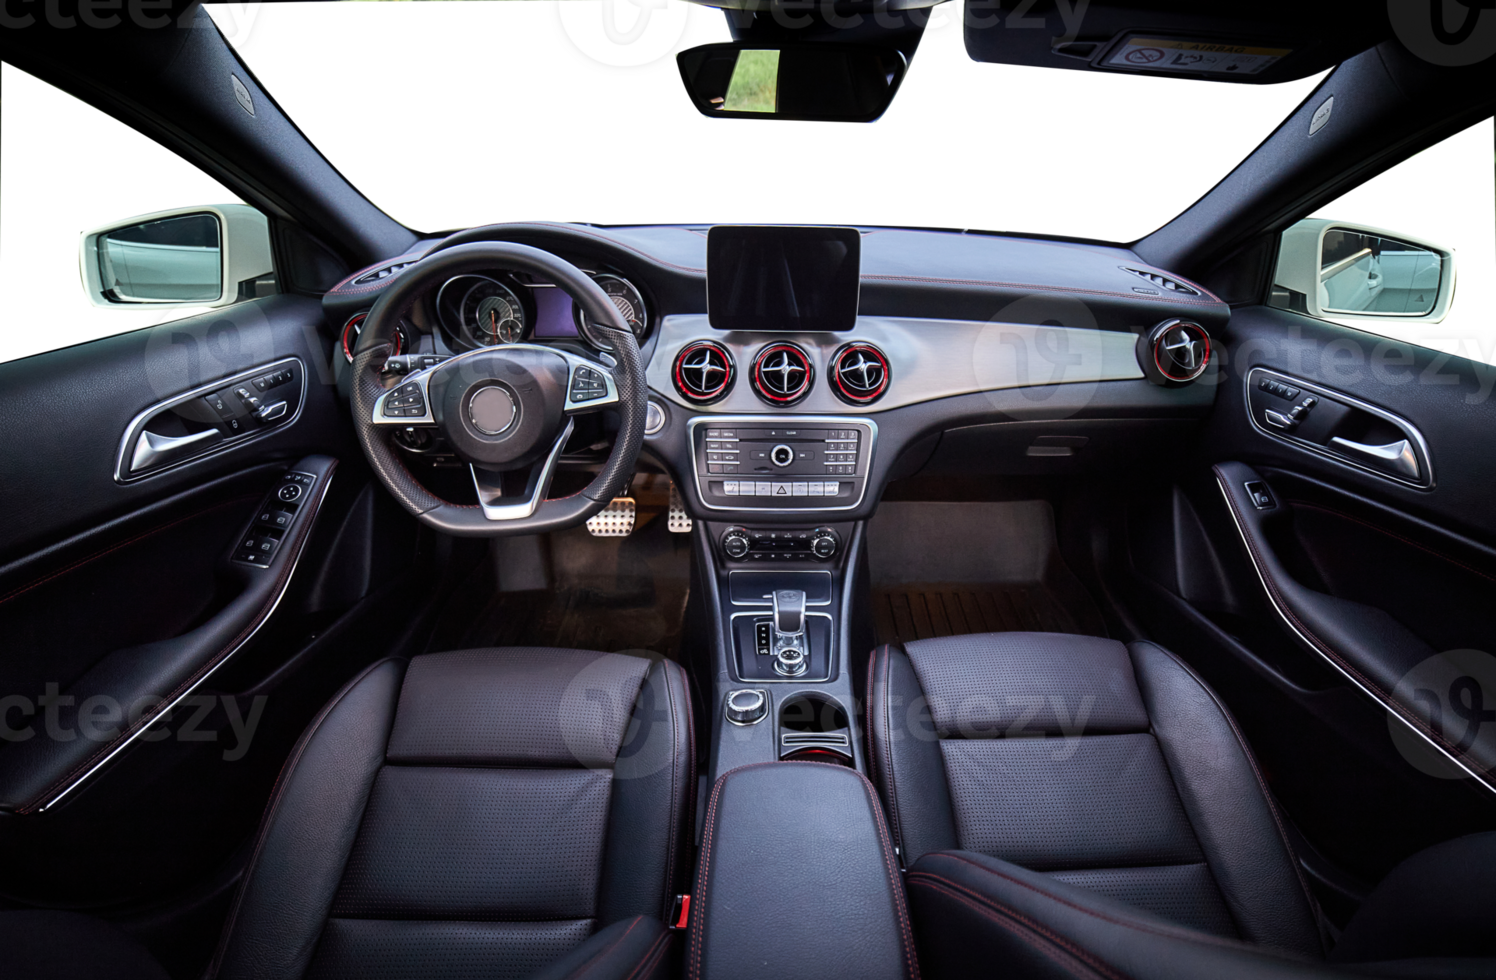 Inside moden car background, luxury car interior elements wallpaper. Black leather car interior png